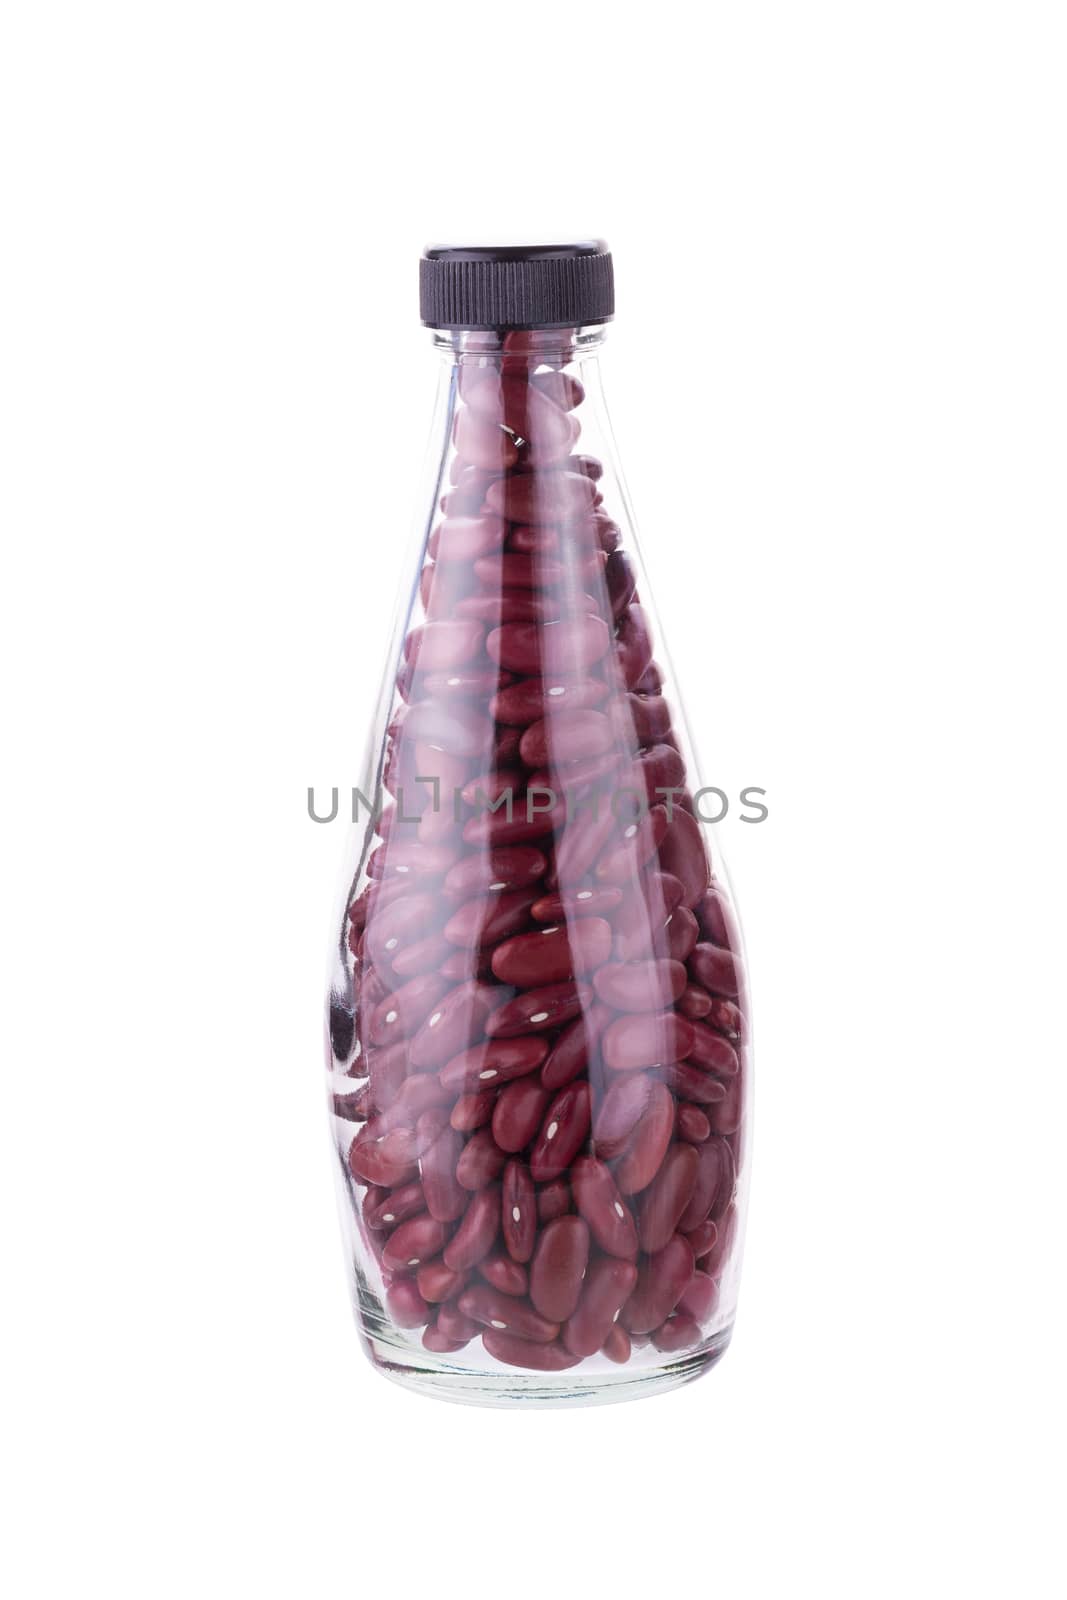 Red bean In a bottle isolated on a white background by kaiskynet